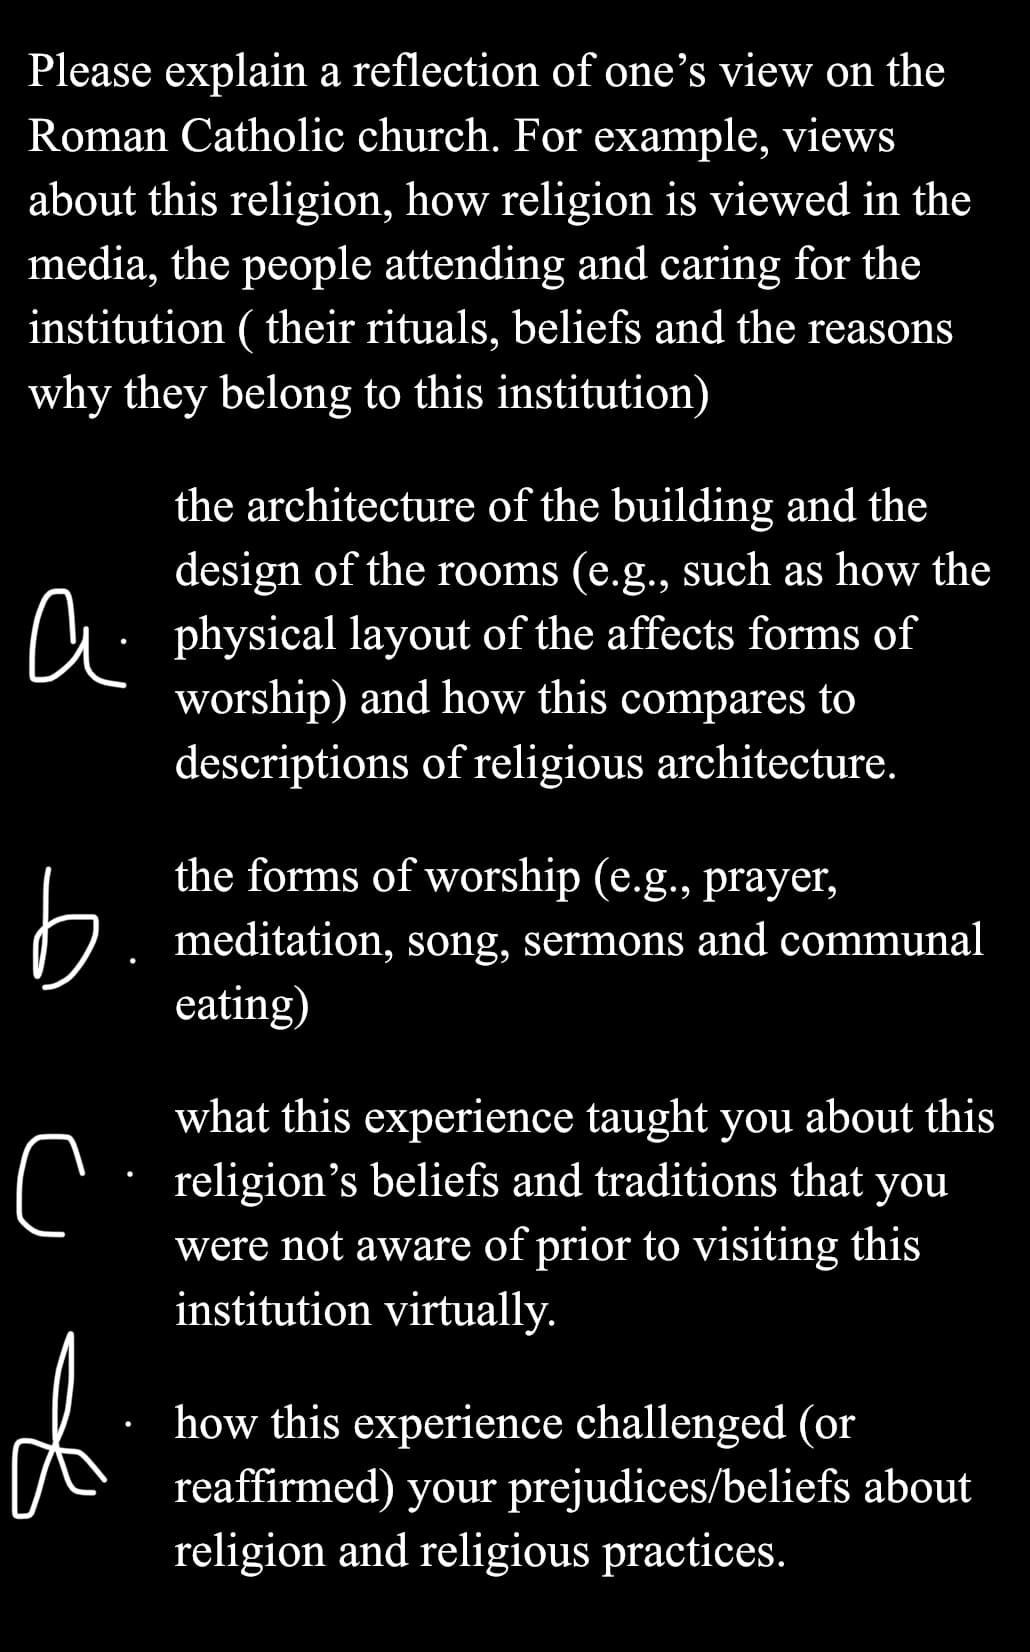 Please explain a reflection of one's view on the
Roman Catholic church. For example, views
about this religion, how religion is viewed in the
media, the people attending and caring for the
institution (their rituals, beliefs and the reasons
why they belong to this institution)
b
the architecture of the building and the
design of the rooms (e.g., such as how the
physical layout of the affects forms of
worship) and how this compares to
descriptions of religious architecture.
the forms of worship (e.g., prayer,
meditation, song, sermons and communal
eating)
what this experience taught you about this
religion's beliefs and traditions that you
were not aware of prior to visiting this
institution virtually.
с
d
how this experience challenged (or
reaffirmed) your prejudices/beliefs about
religion and religious practices.